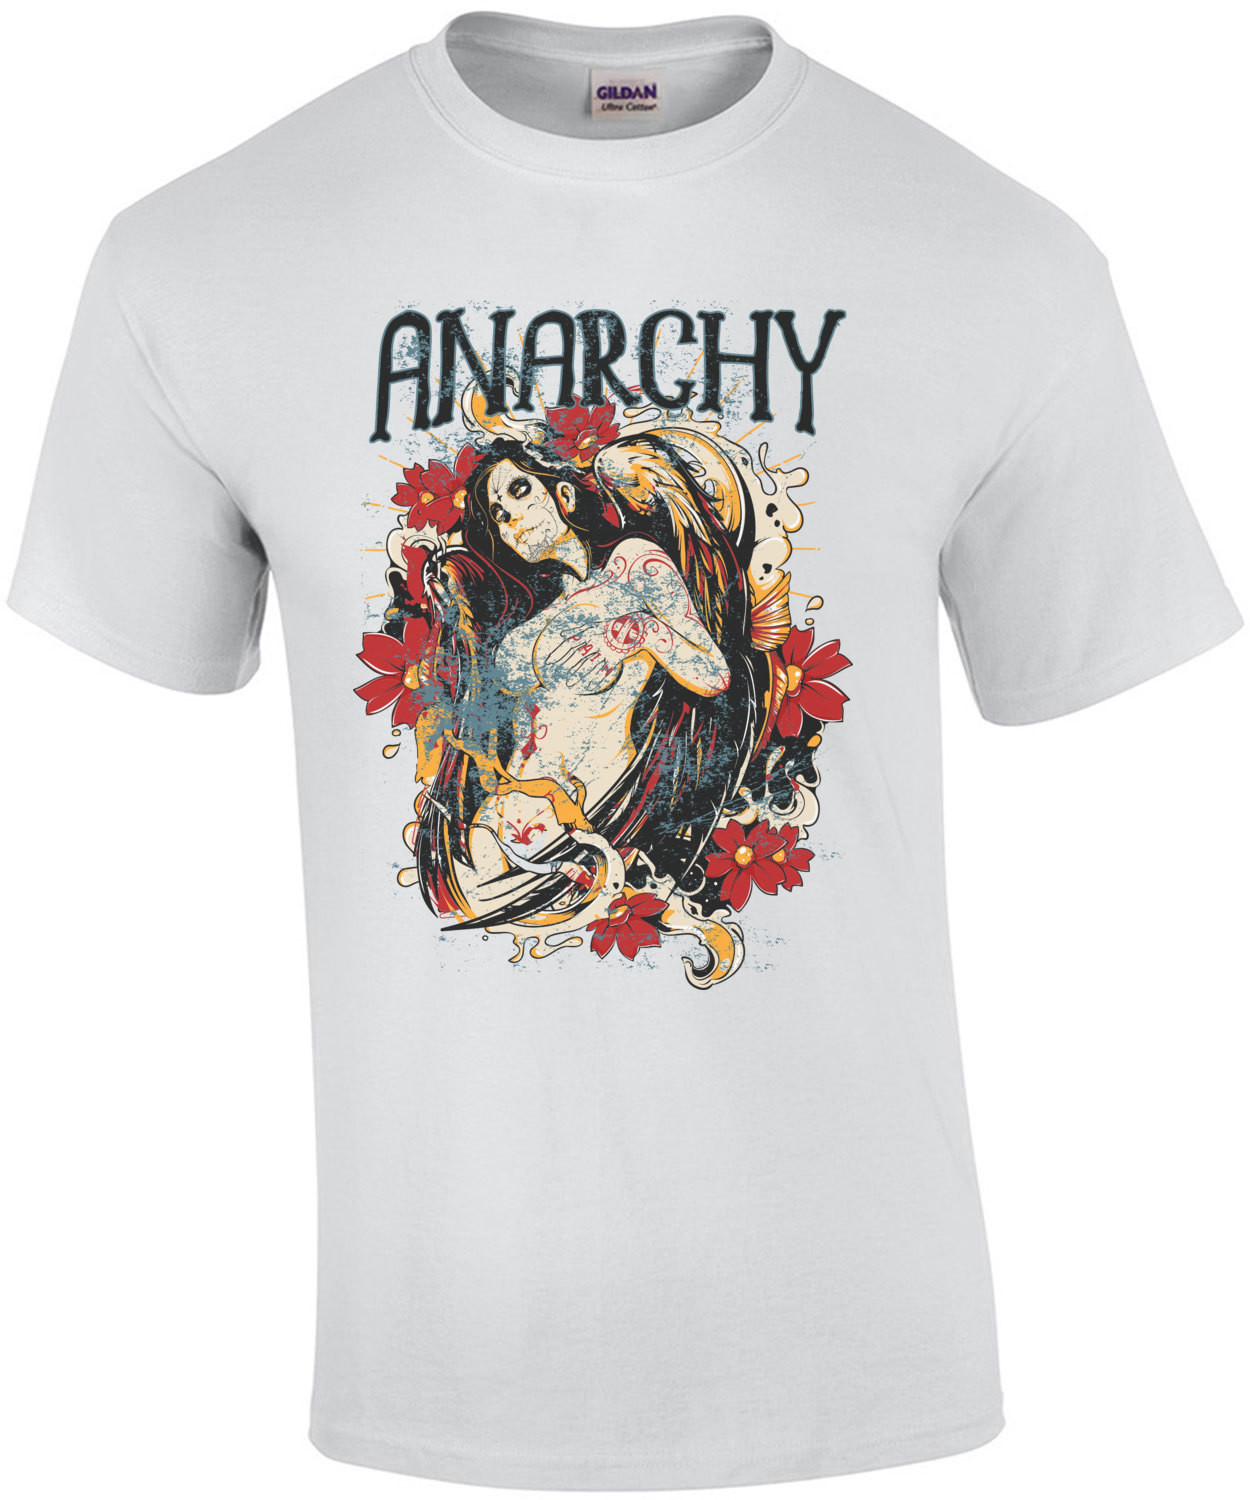 Anarchy Gothic Vintage Graphic T-Shirt